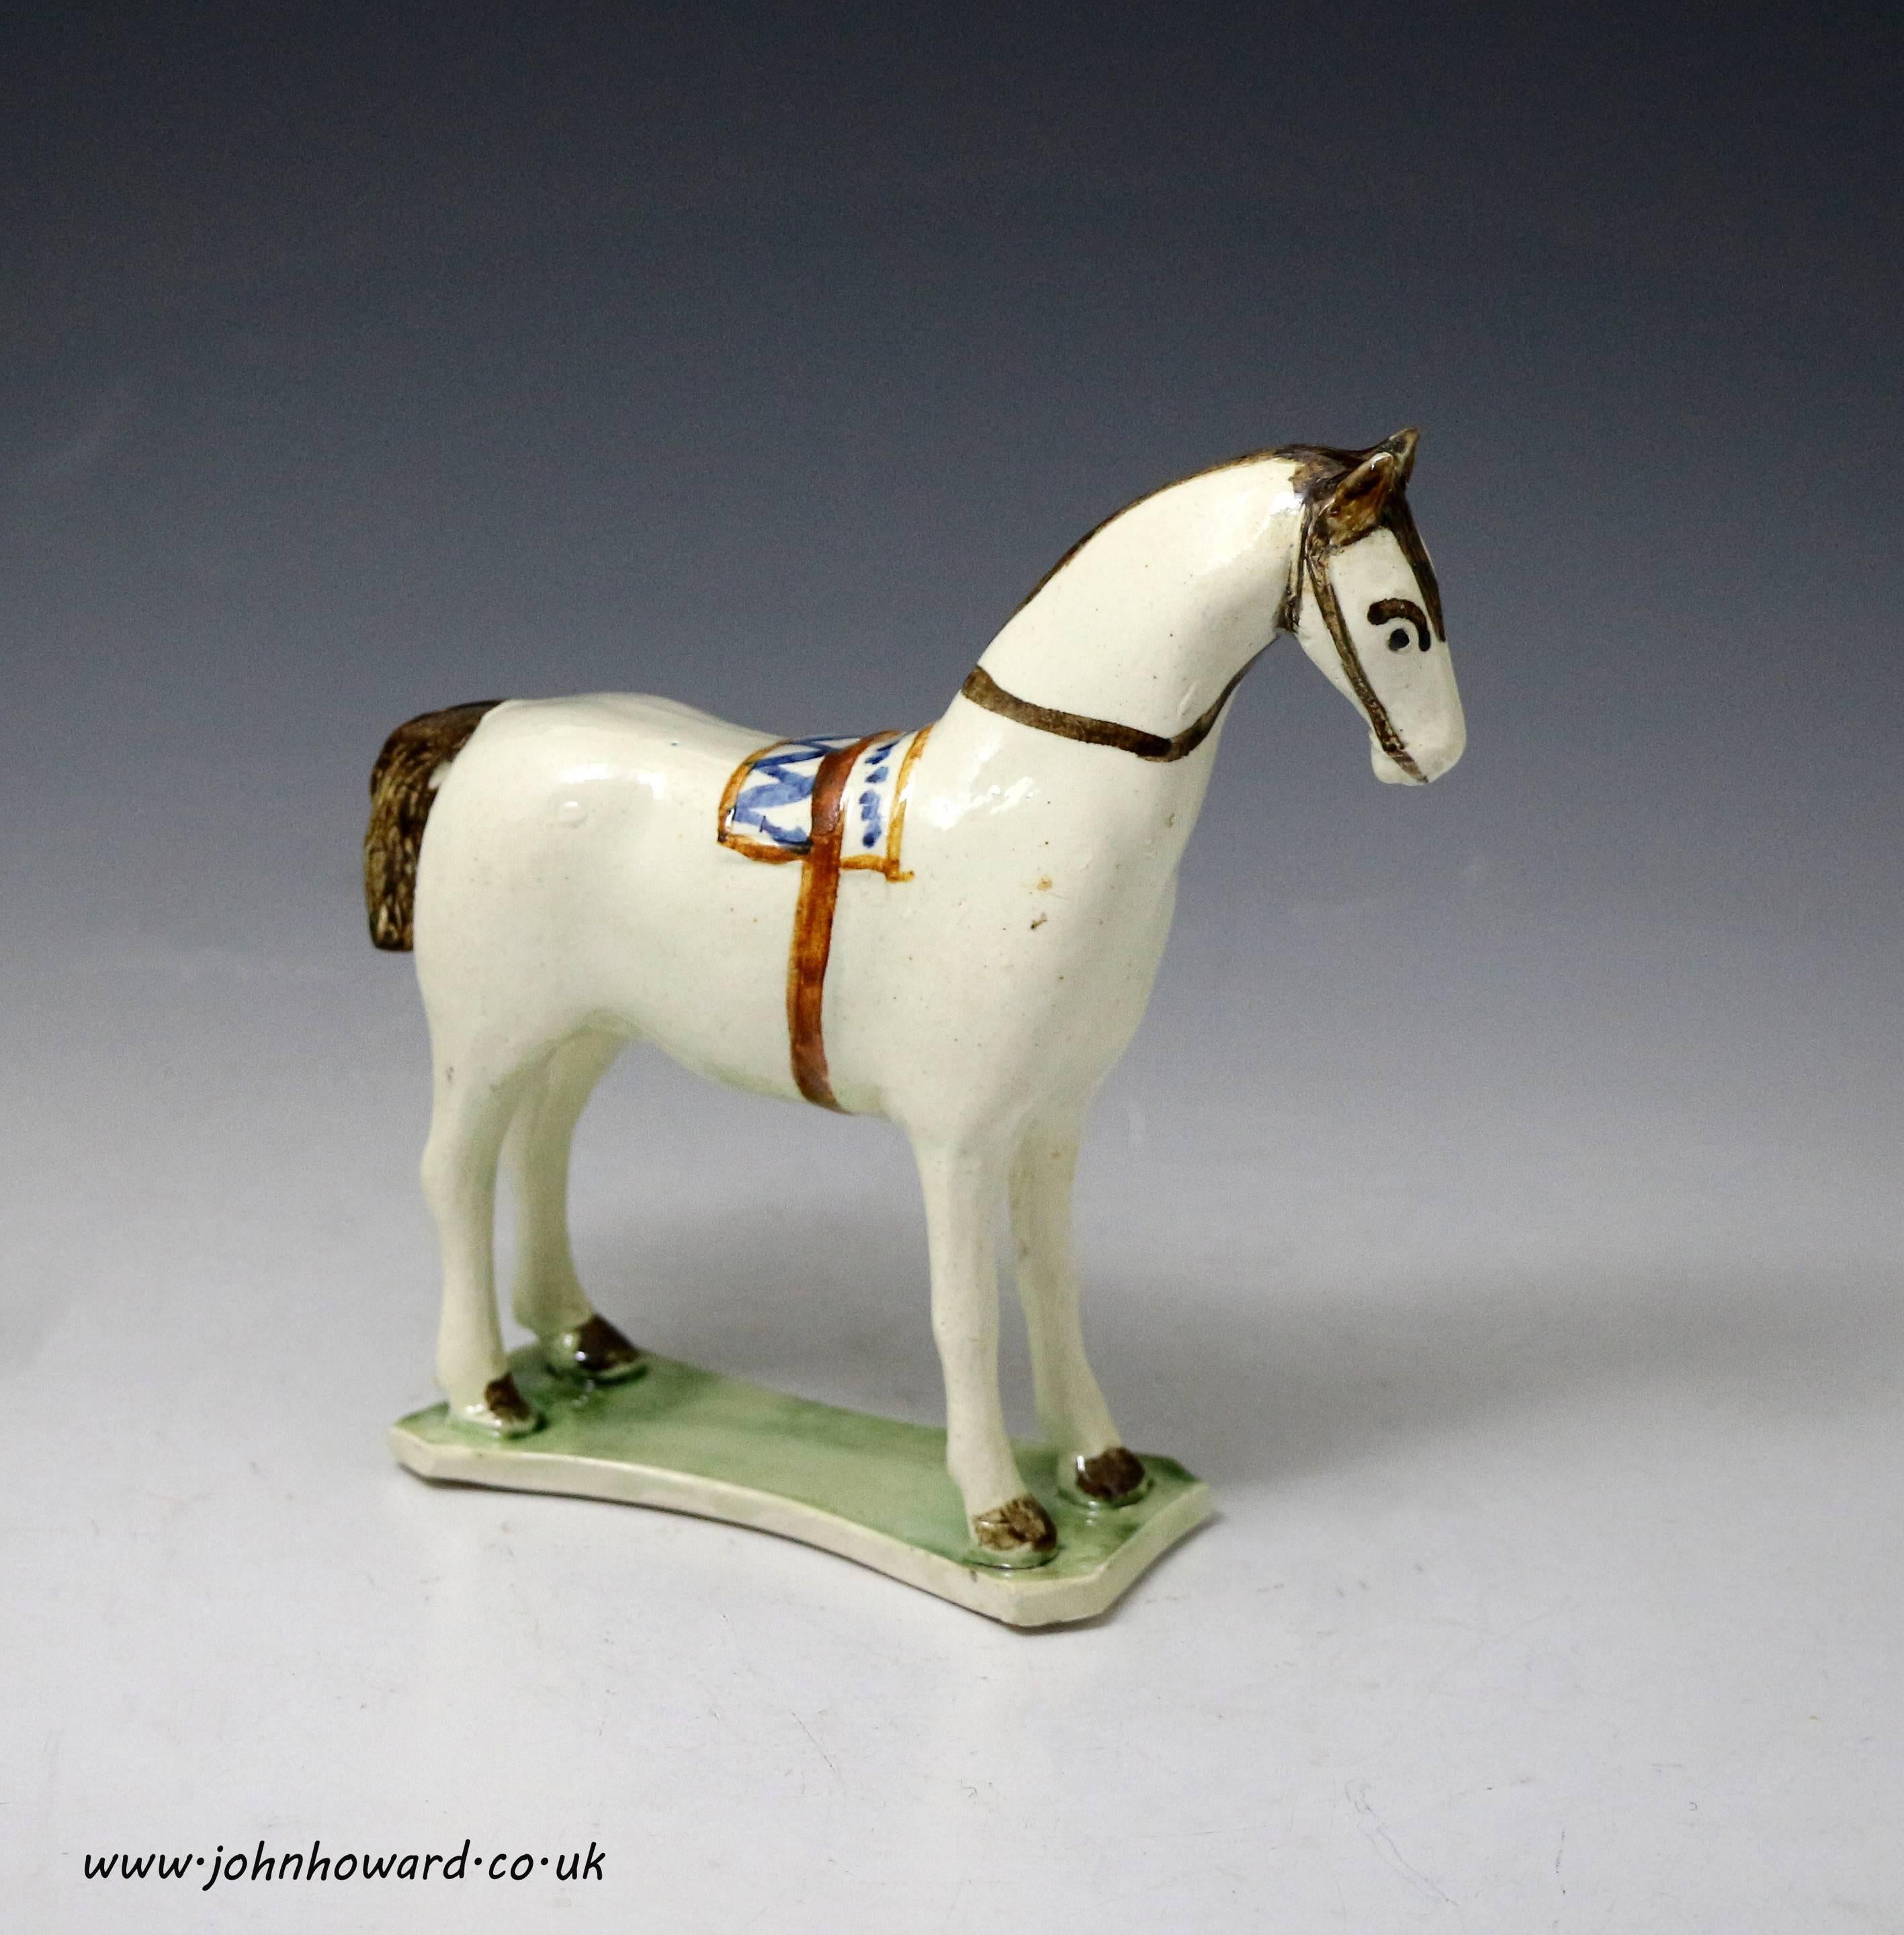 A wonderfully naive figure of a saddled horse standing on a green base. The figure is simply decorated in pratt colours. This rare figure is in remarkably fine condition.